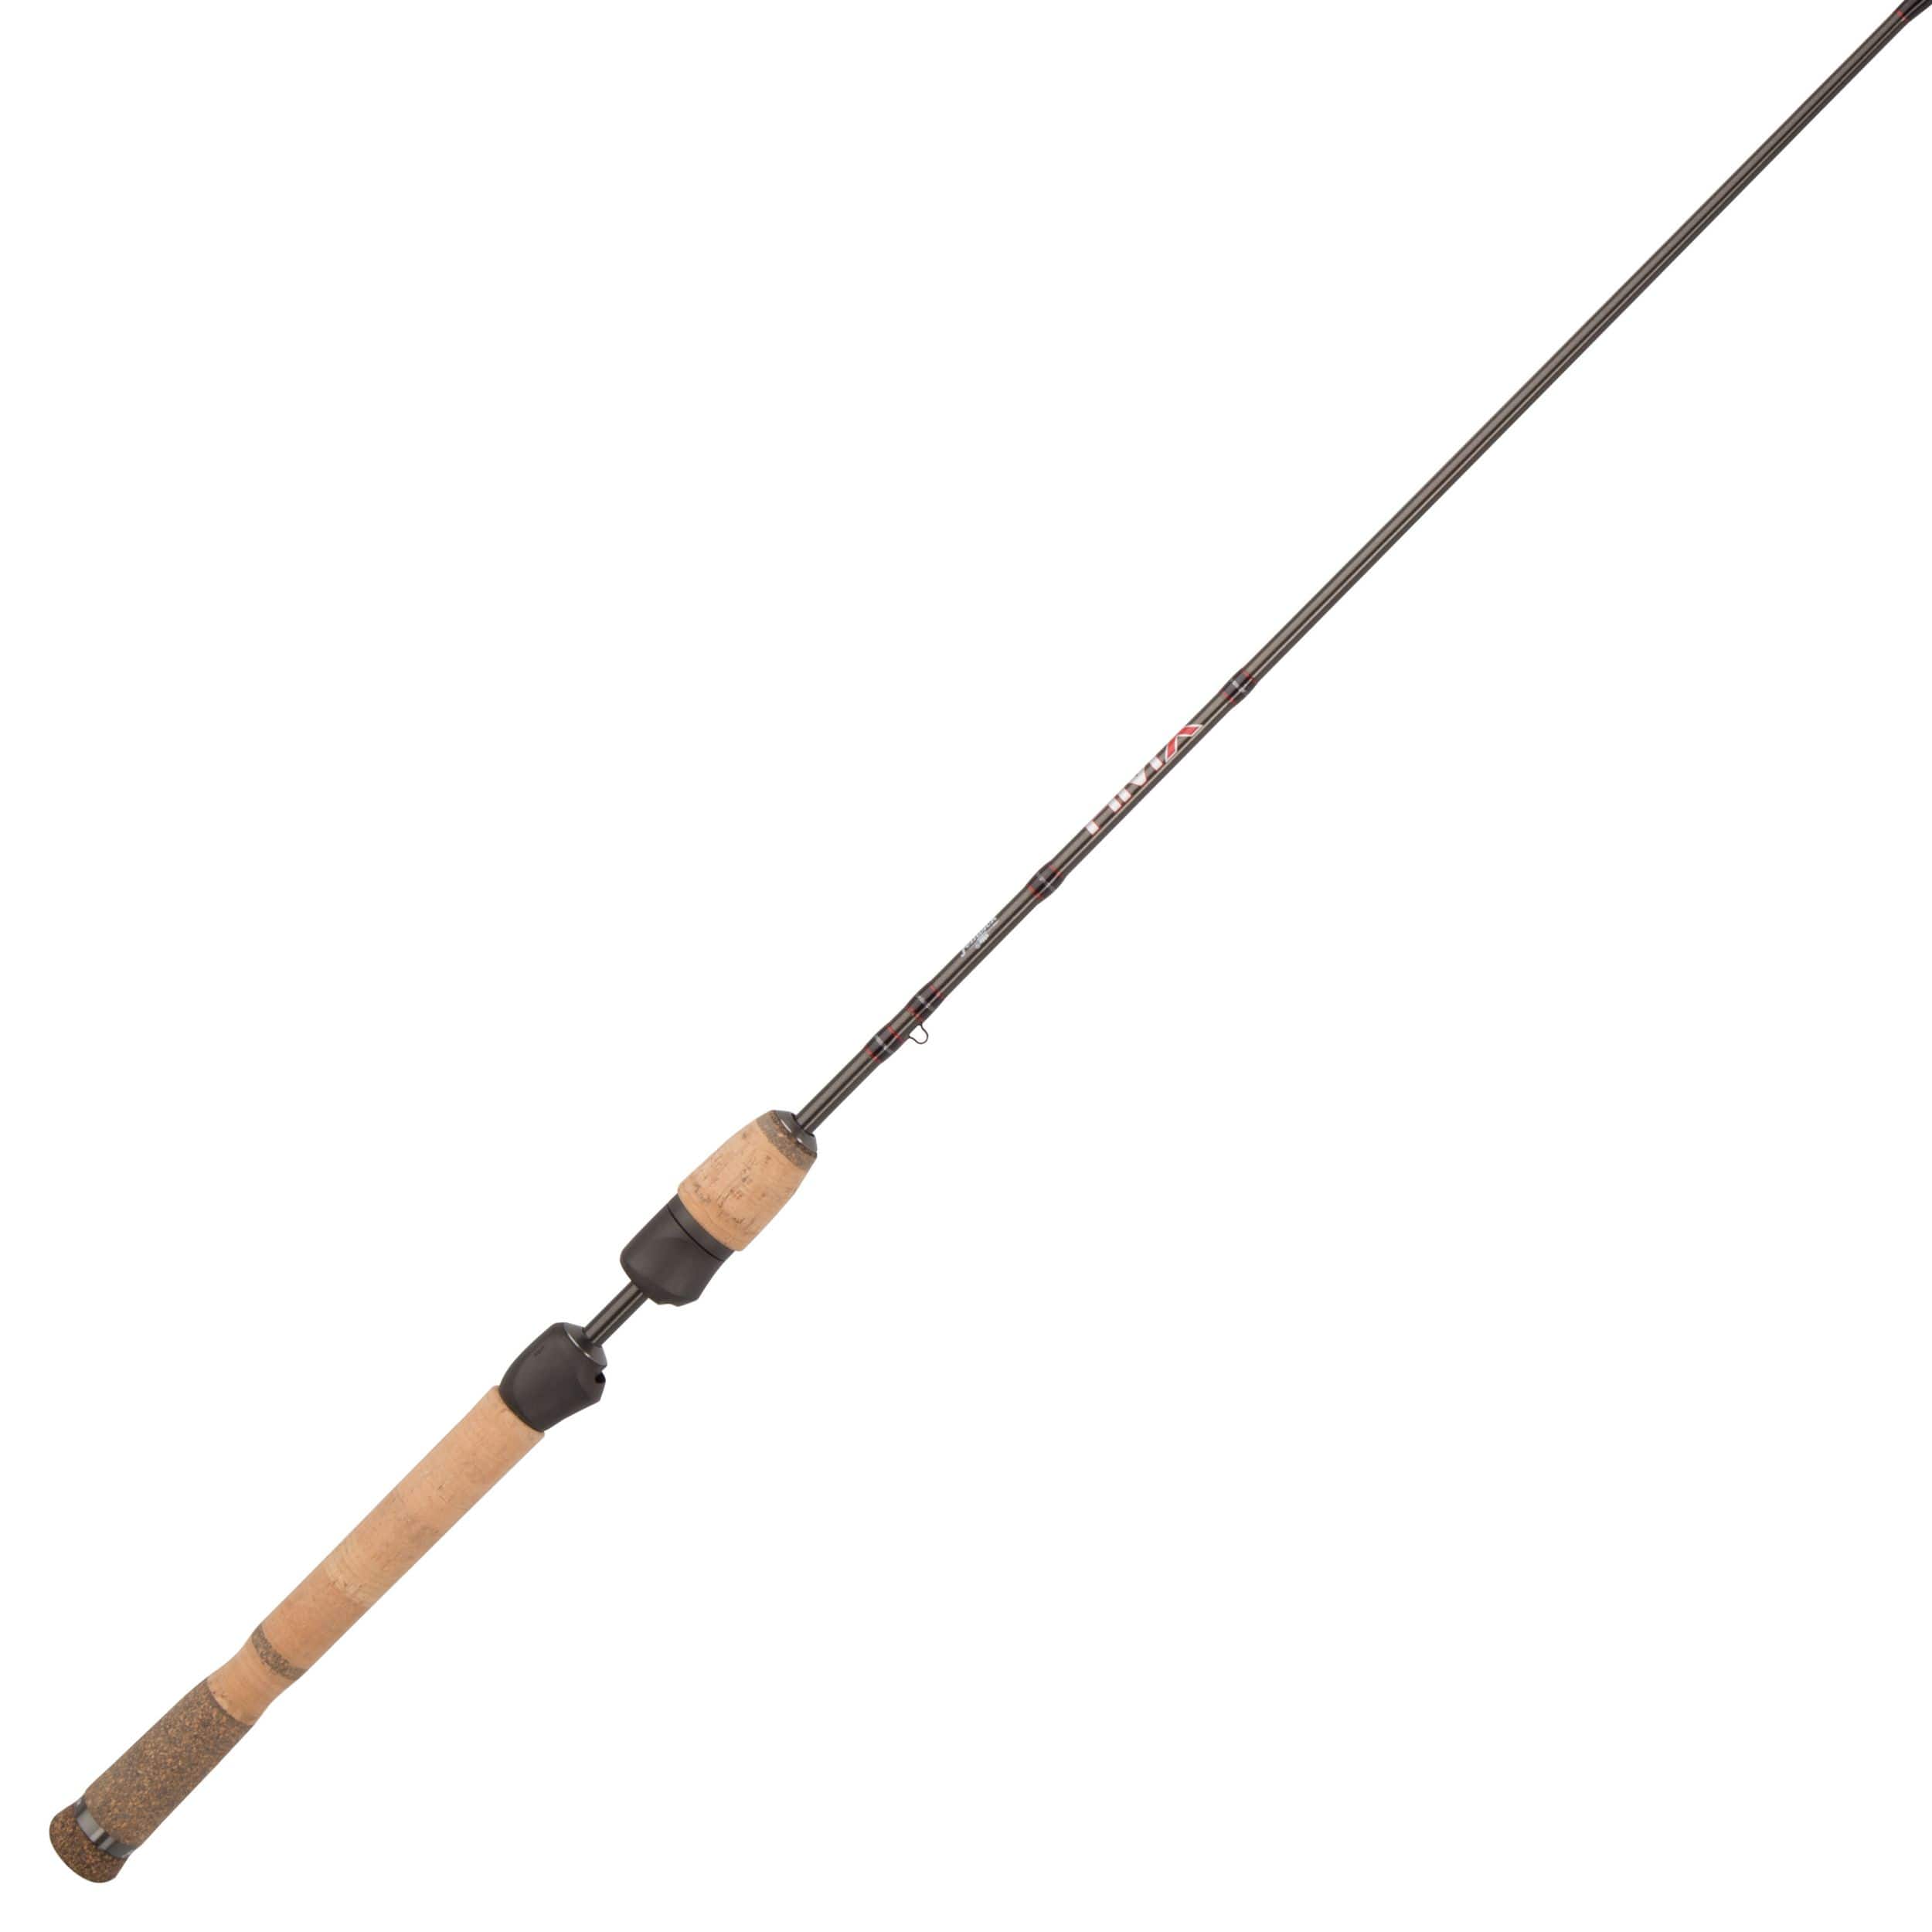 Medium to light spinning rods, online fishing shop - Henry's Tackle Shop